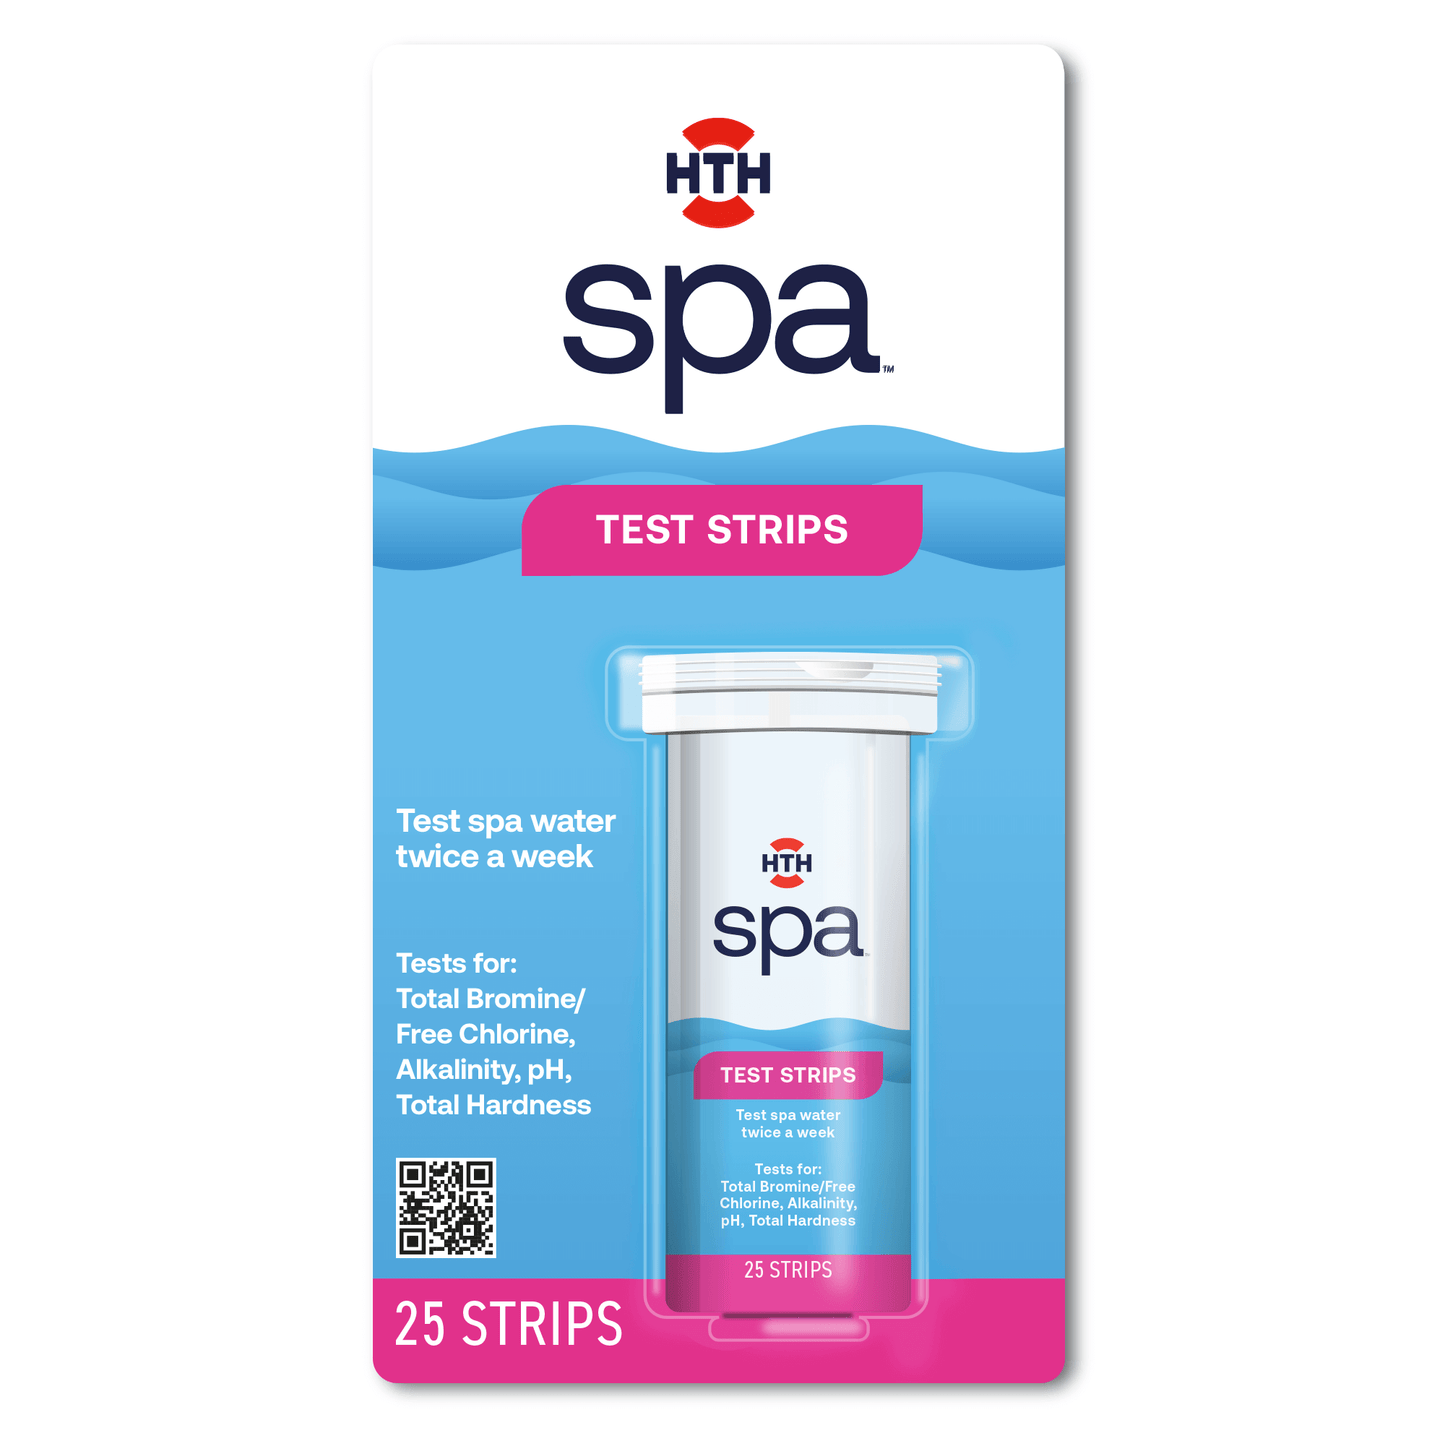 A pack of HTH Spa care test strips for spa water balancing